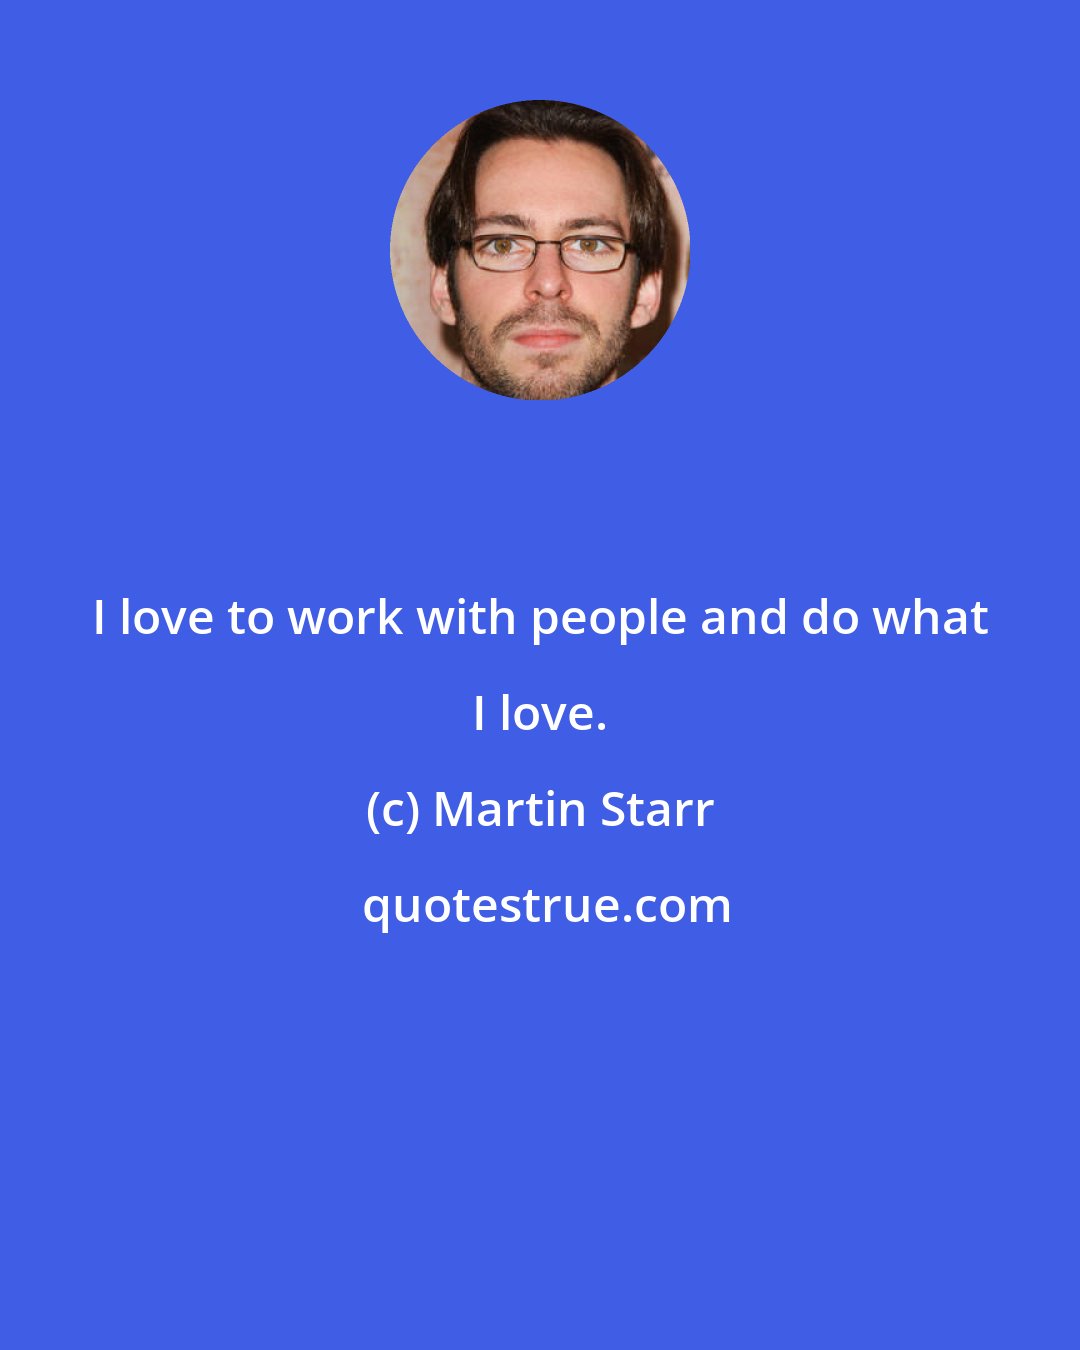 Martin Starr: I love to work with people and do what I love.